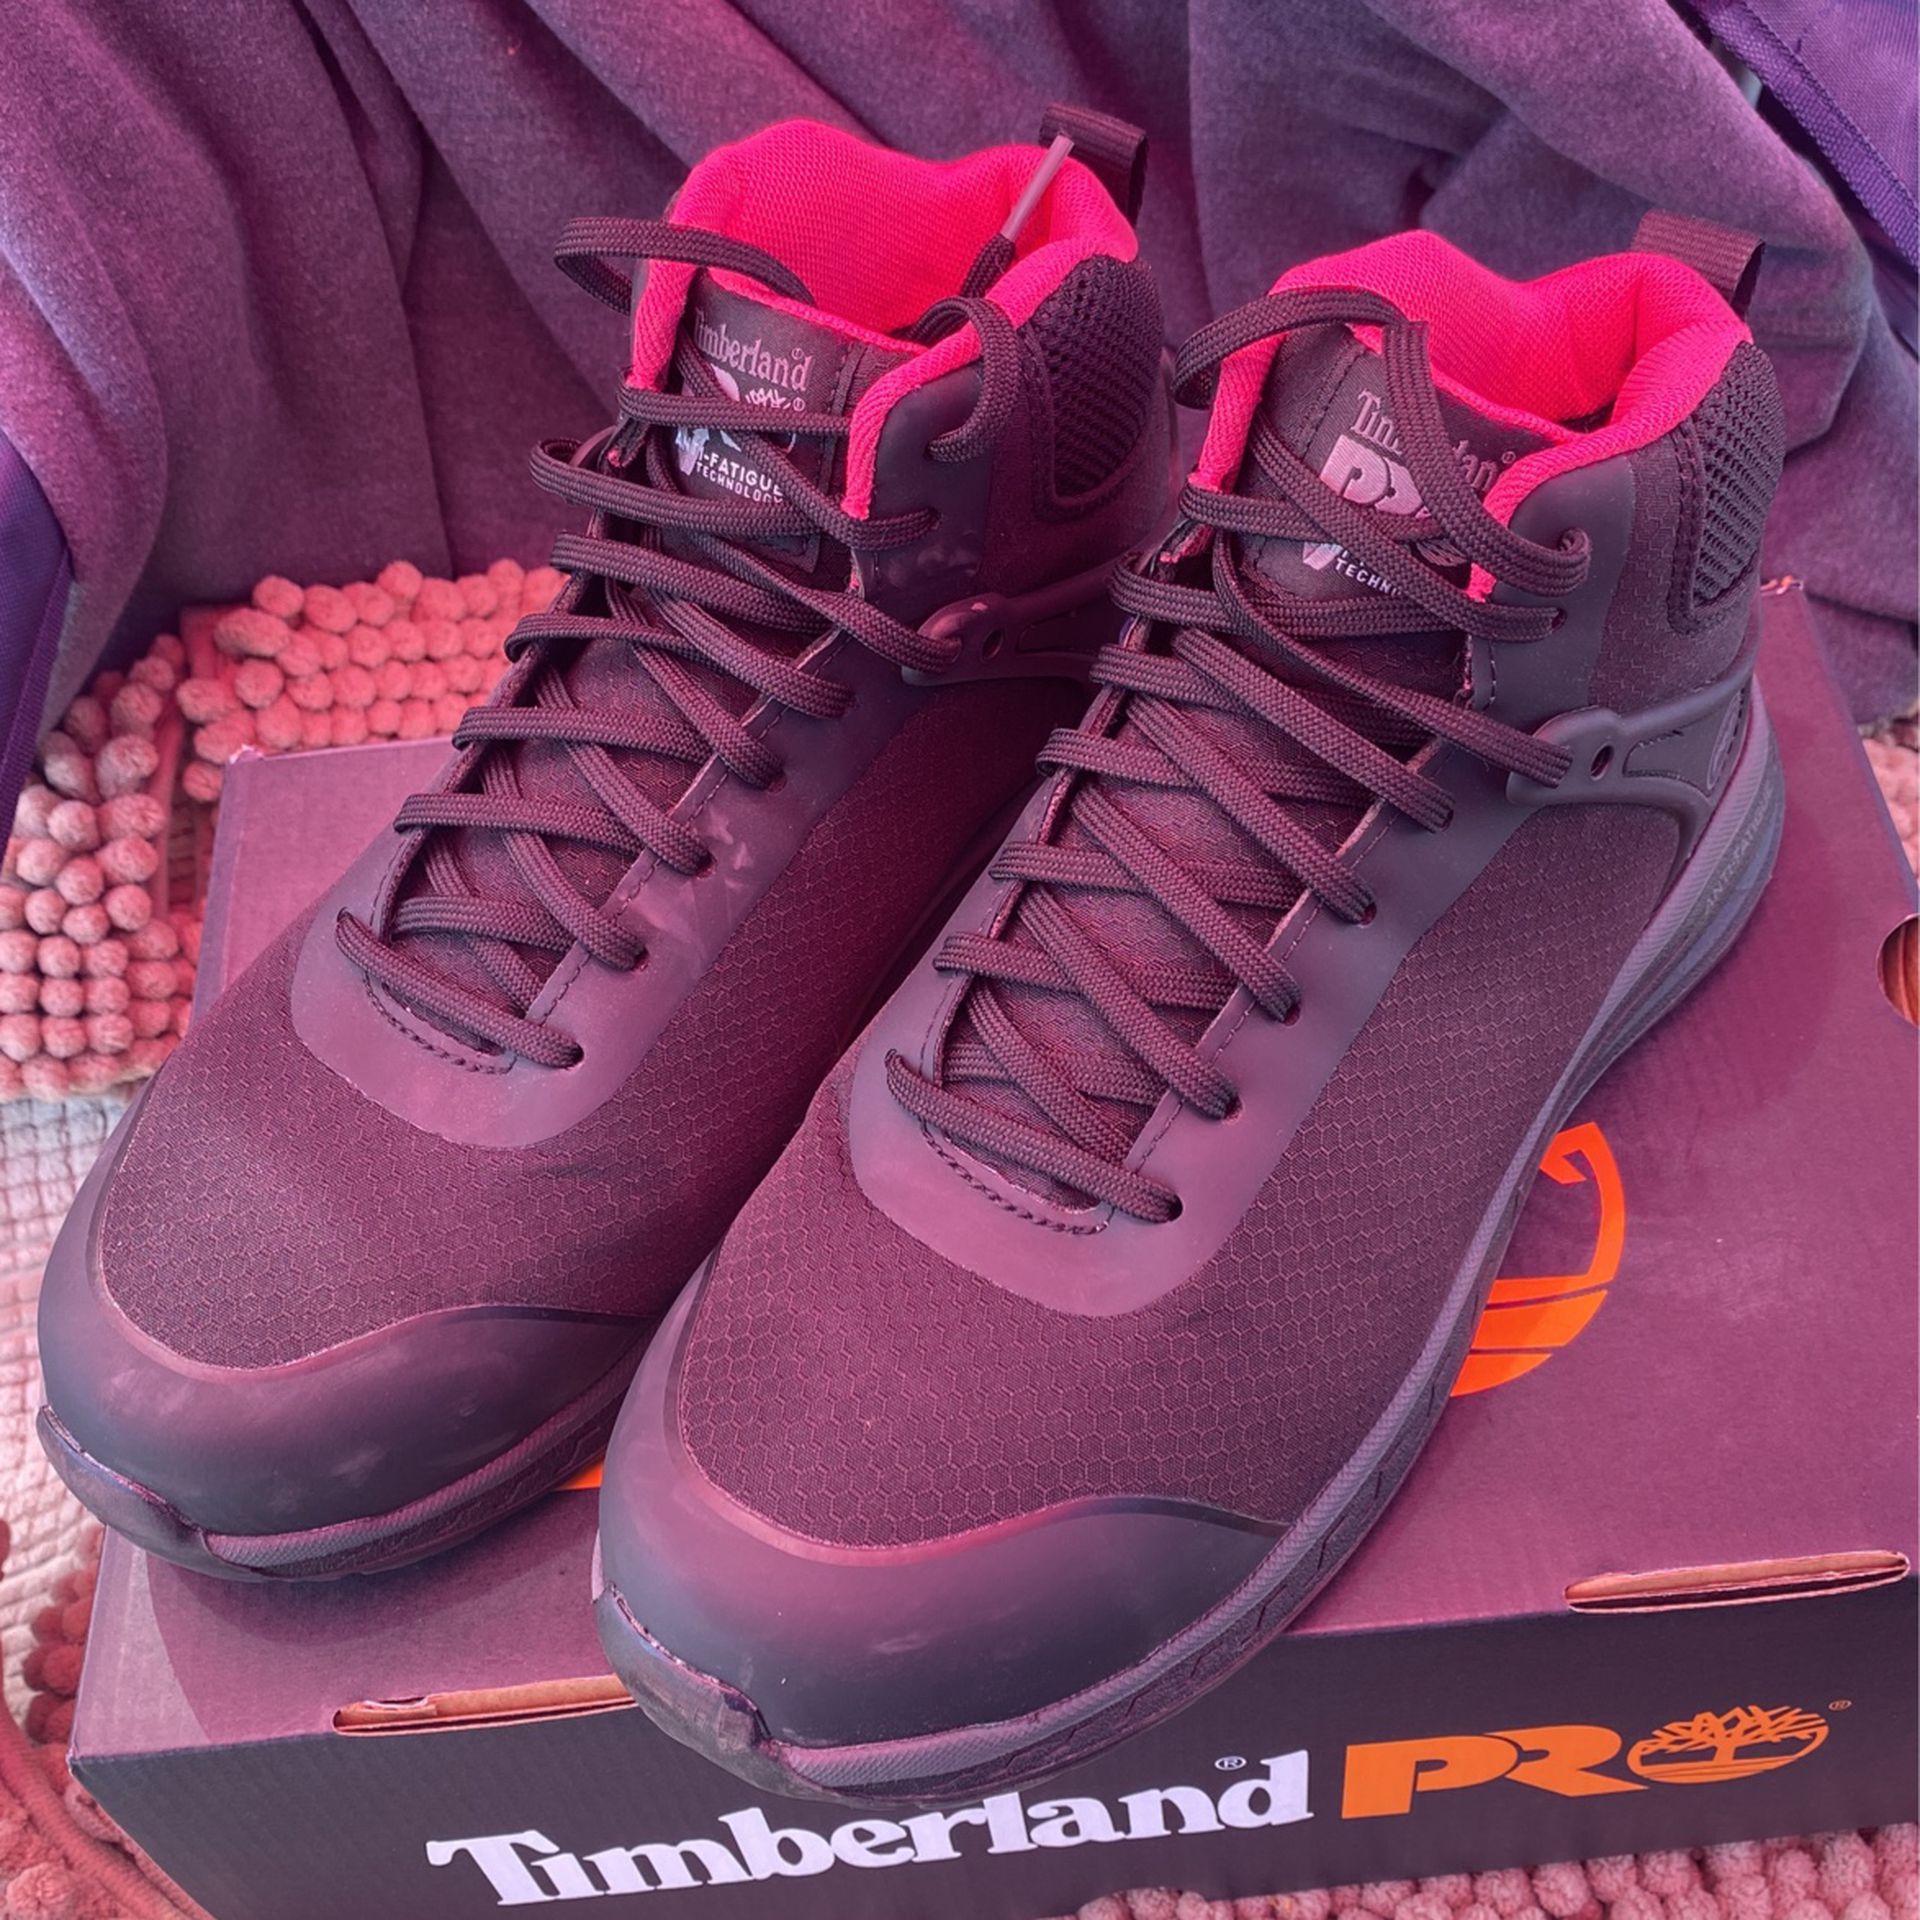 Timberland Pro Composite Saftey Shoes 